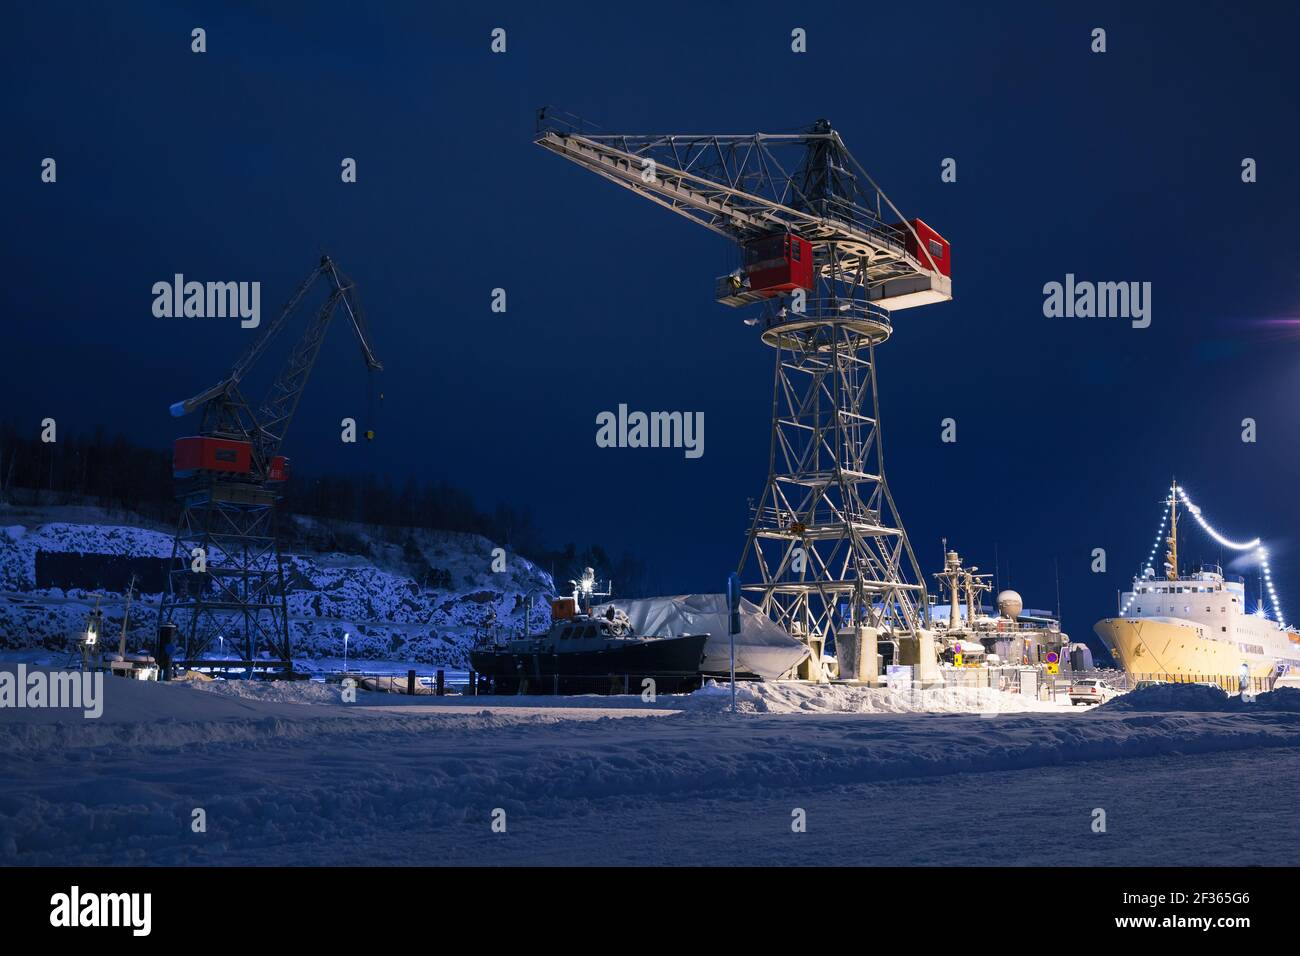 Industrial cranes and cargo ships are in port of Turku at night, Finland Stock Photo